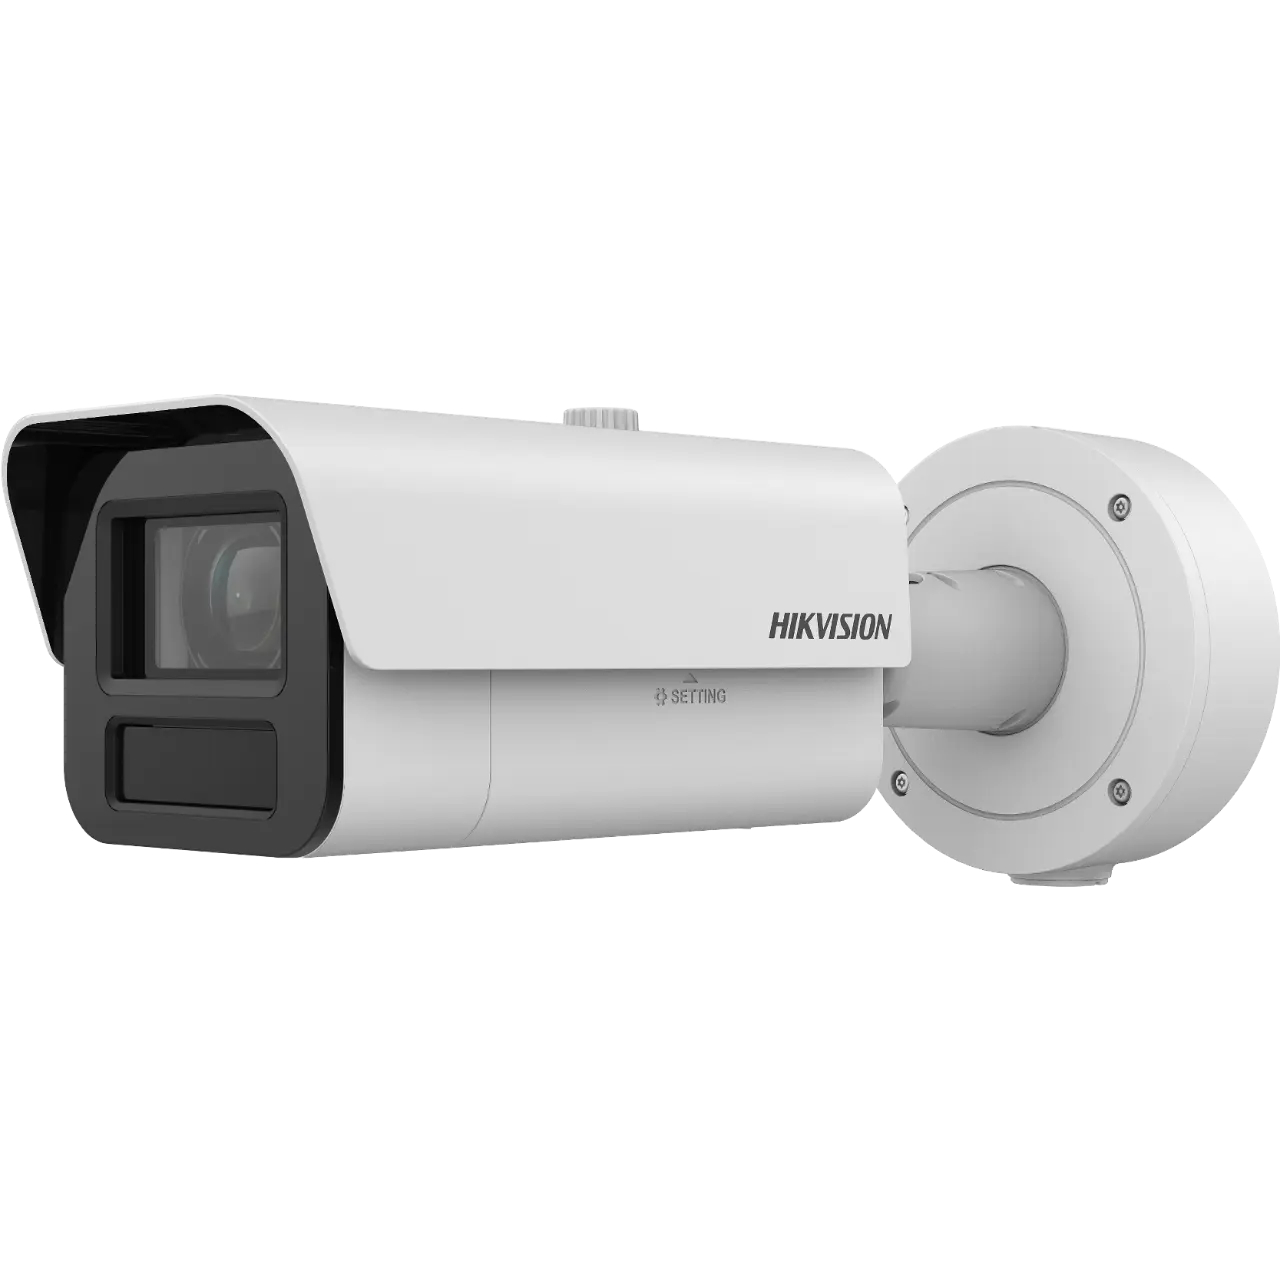 20001055 Hikvision DeeipinView camera bullet 4MP, VF, 4.7-118mm, zoom 25x